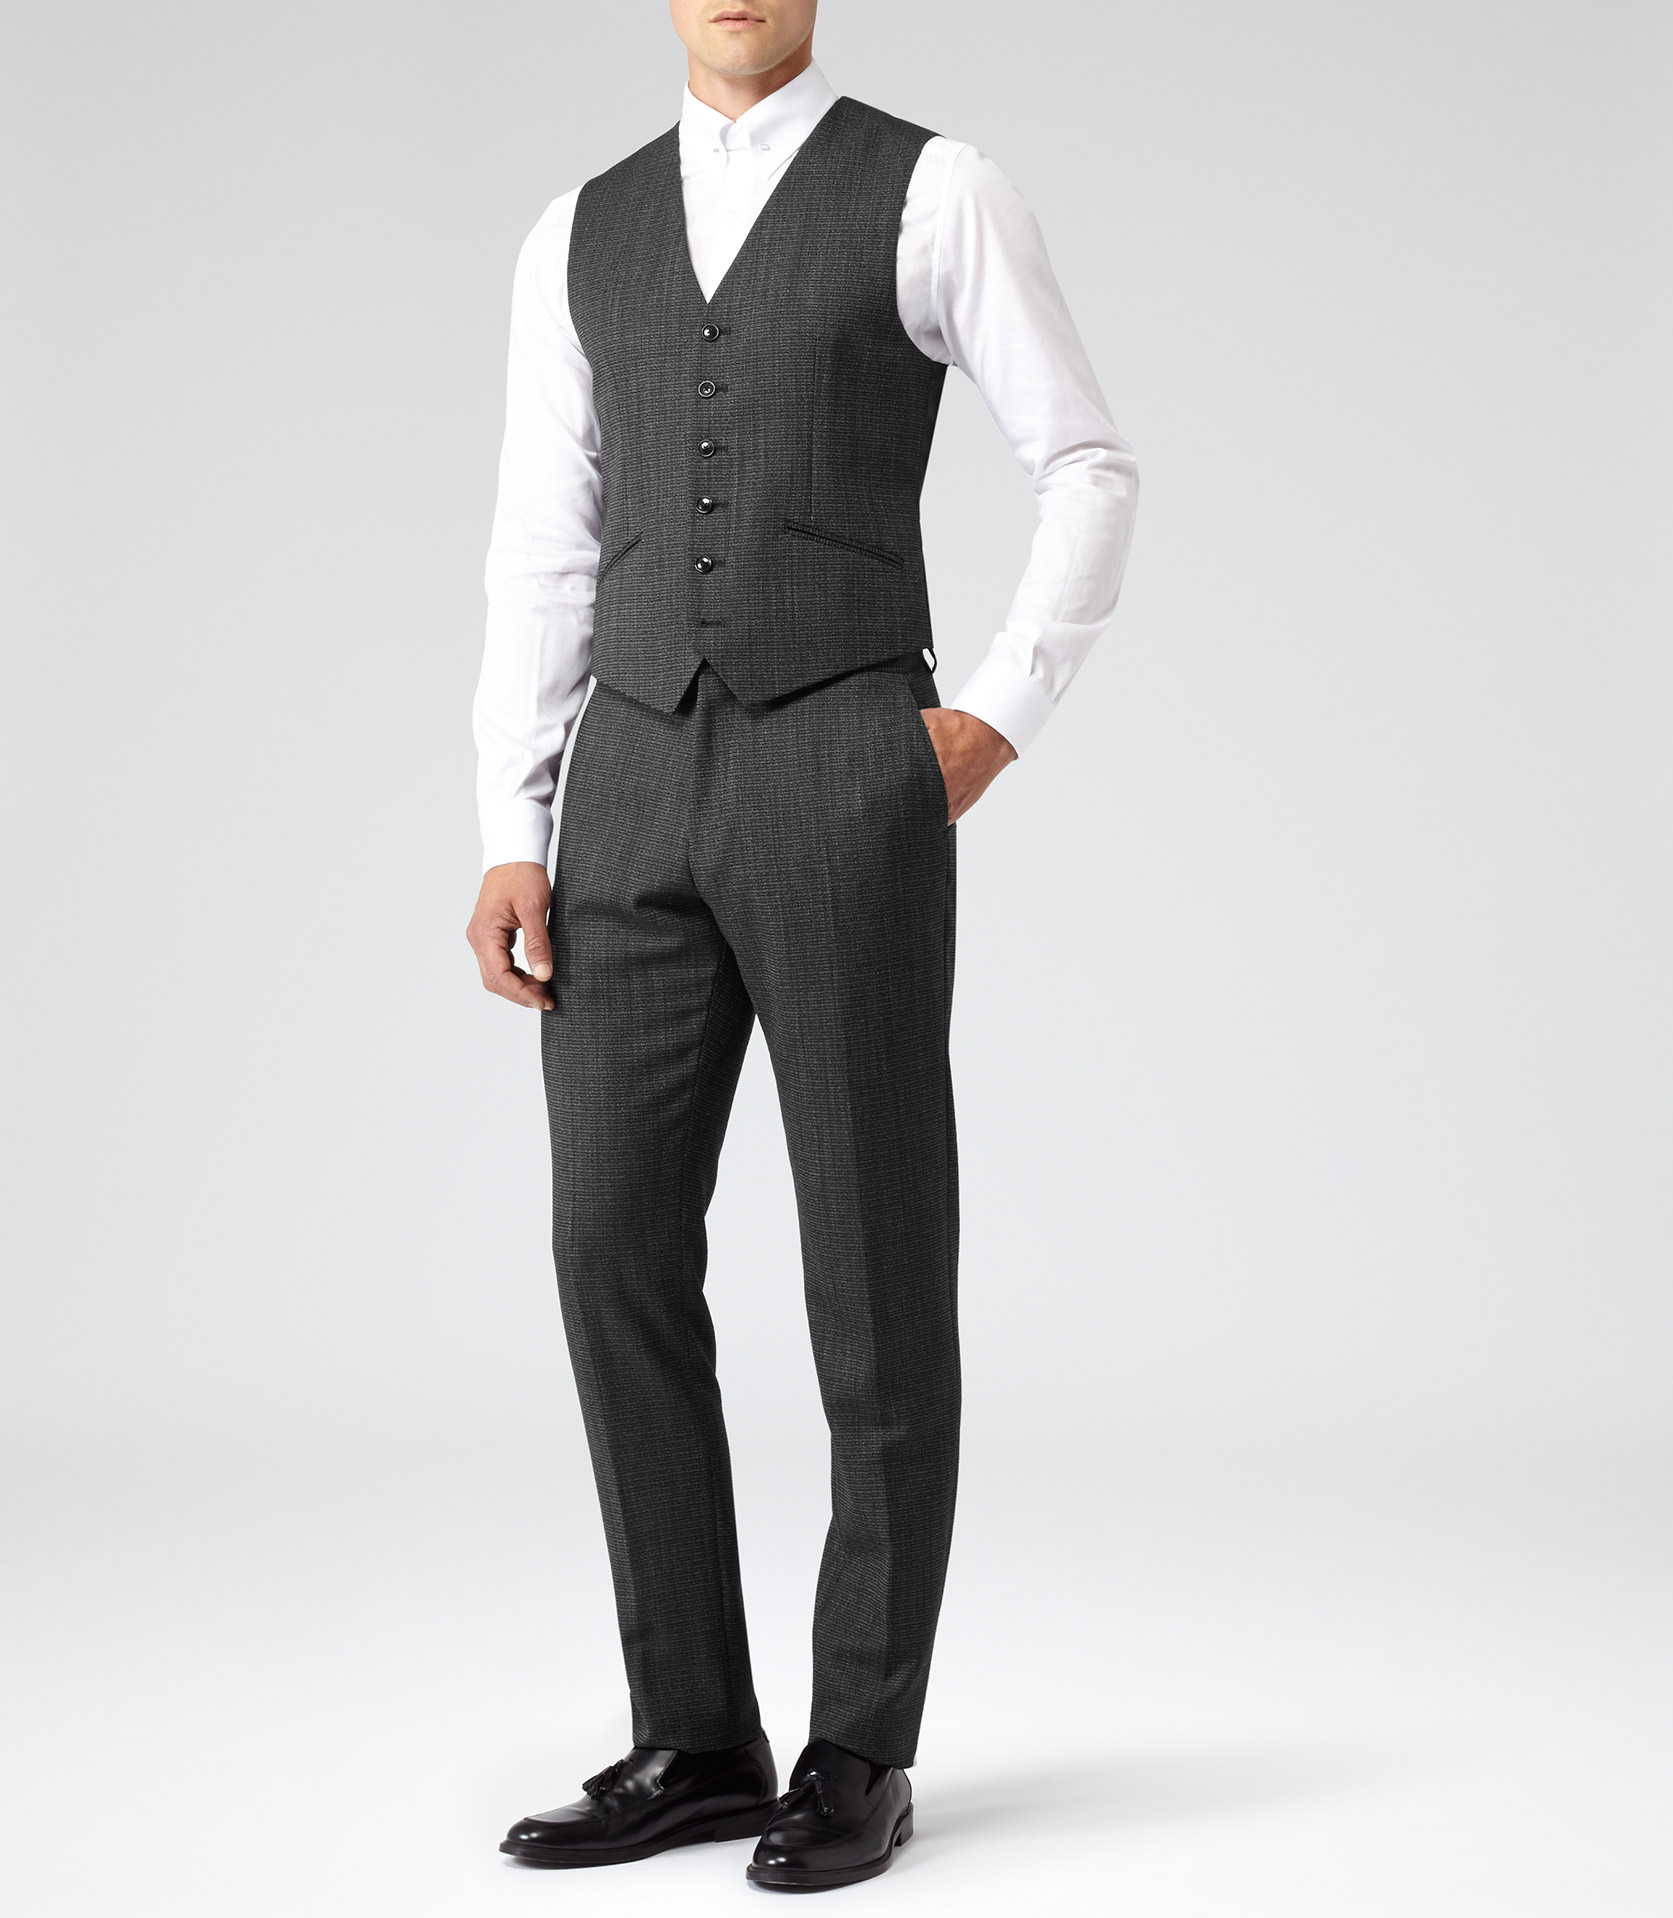 Lyst - Reiss Malcolm Three-Piece Wool Suit in Gray for Men